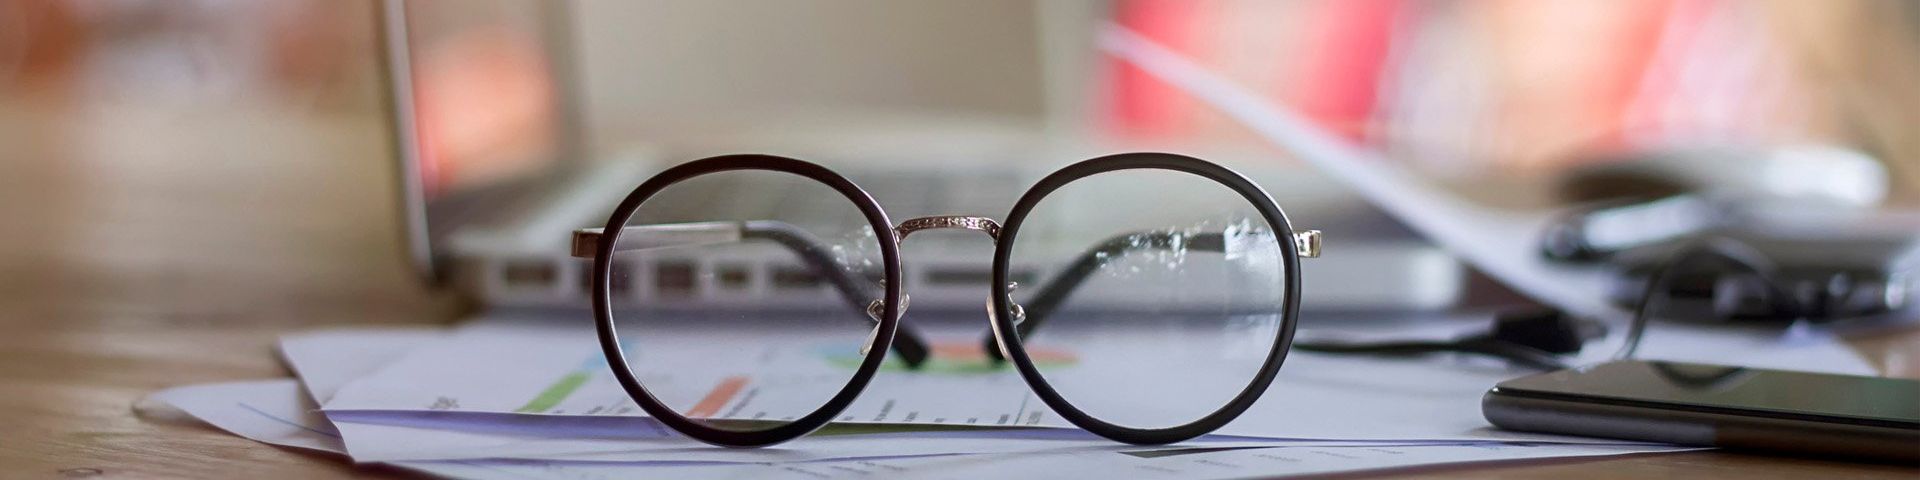 A pair of spectacles sat on top of paperwork, in front of a laptop and next to a phone